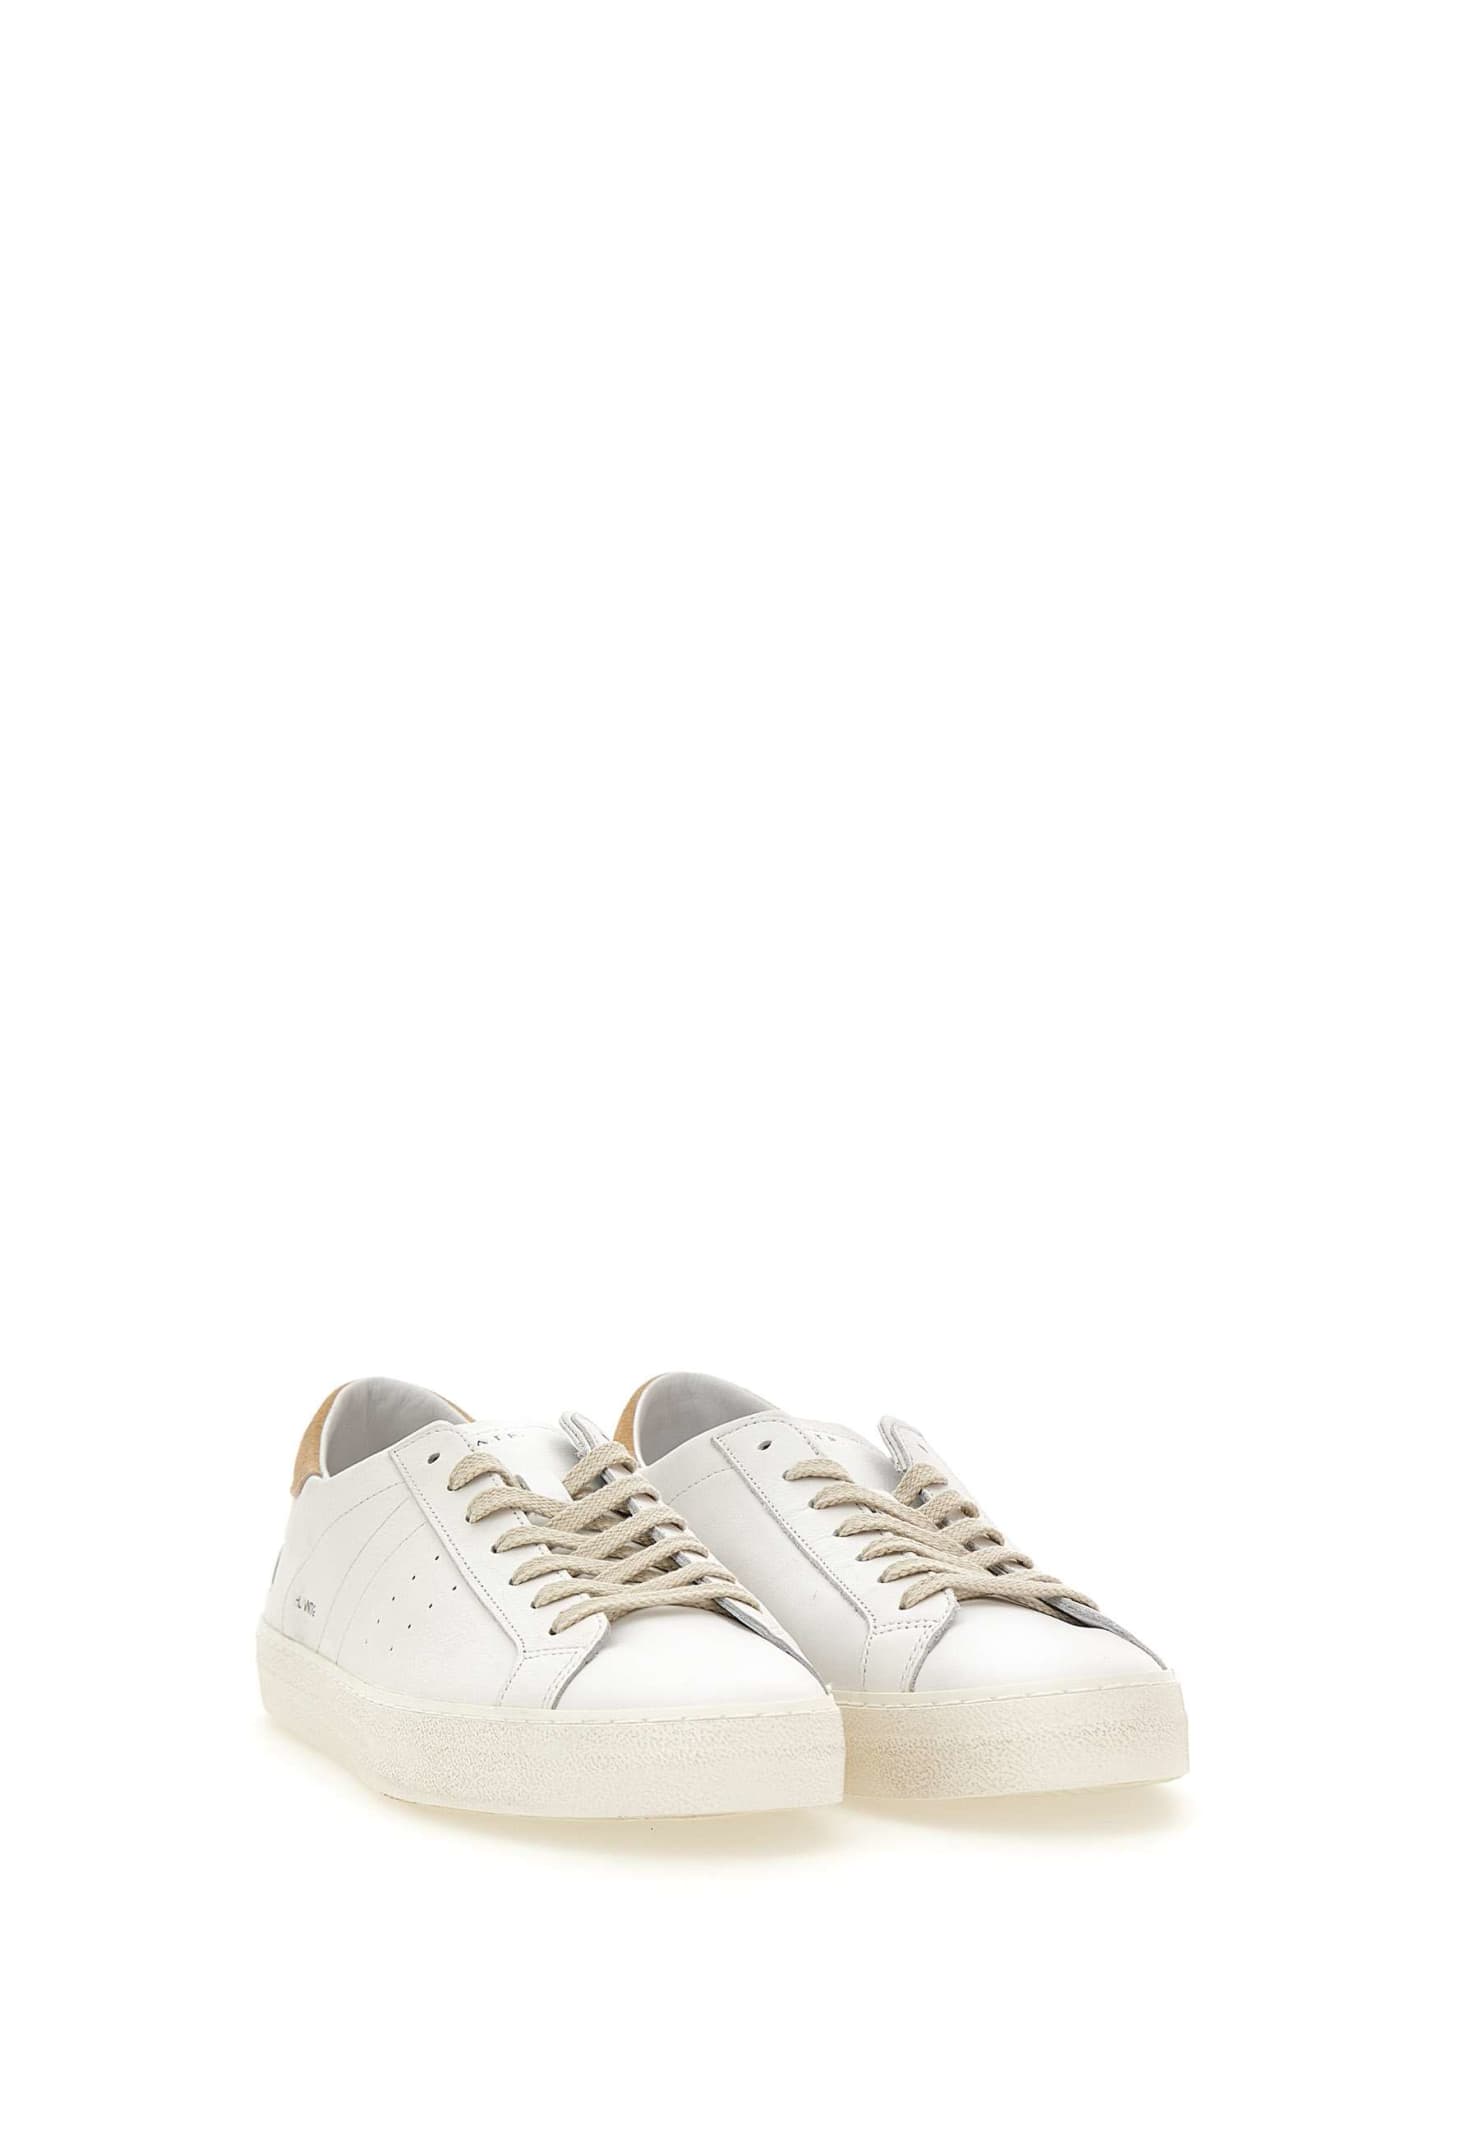 Shop Date Hillow Vintage Calf Leather Sneakers In White